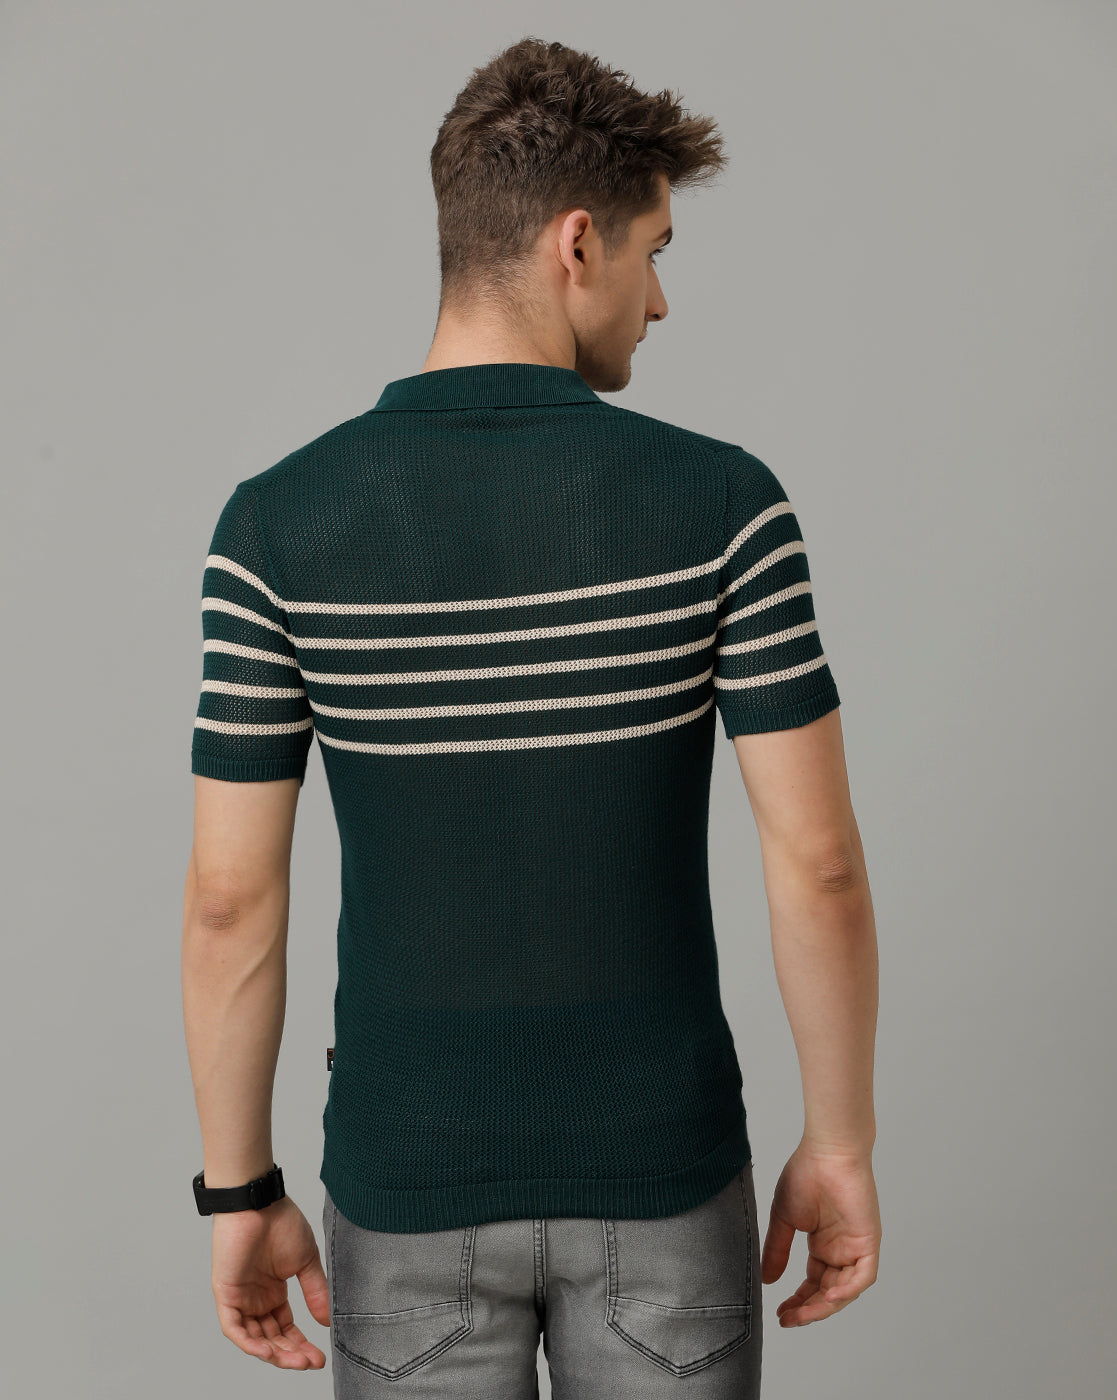 Identiti Green Half Sleeve Striped Slim Fit Cotton Casual Polo T-Shirt For Men.